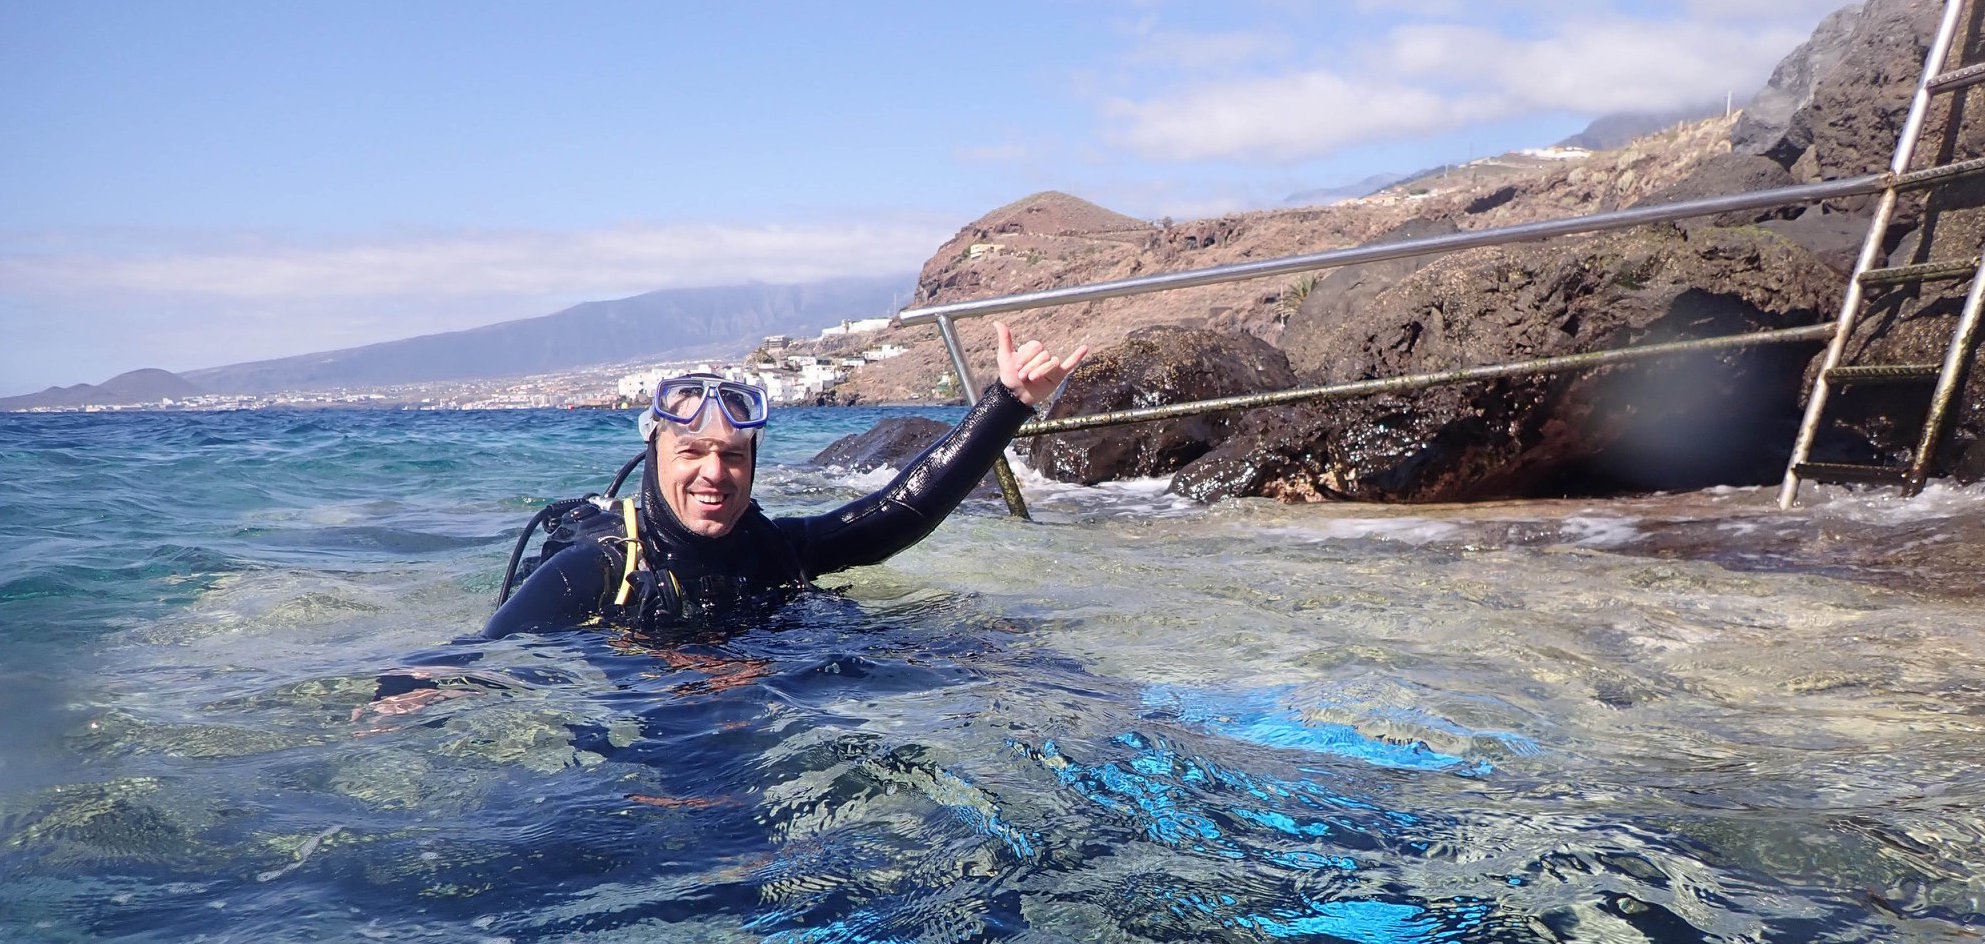 Learn all about scuba diving with this diving course in Tenerife